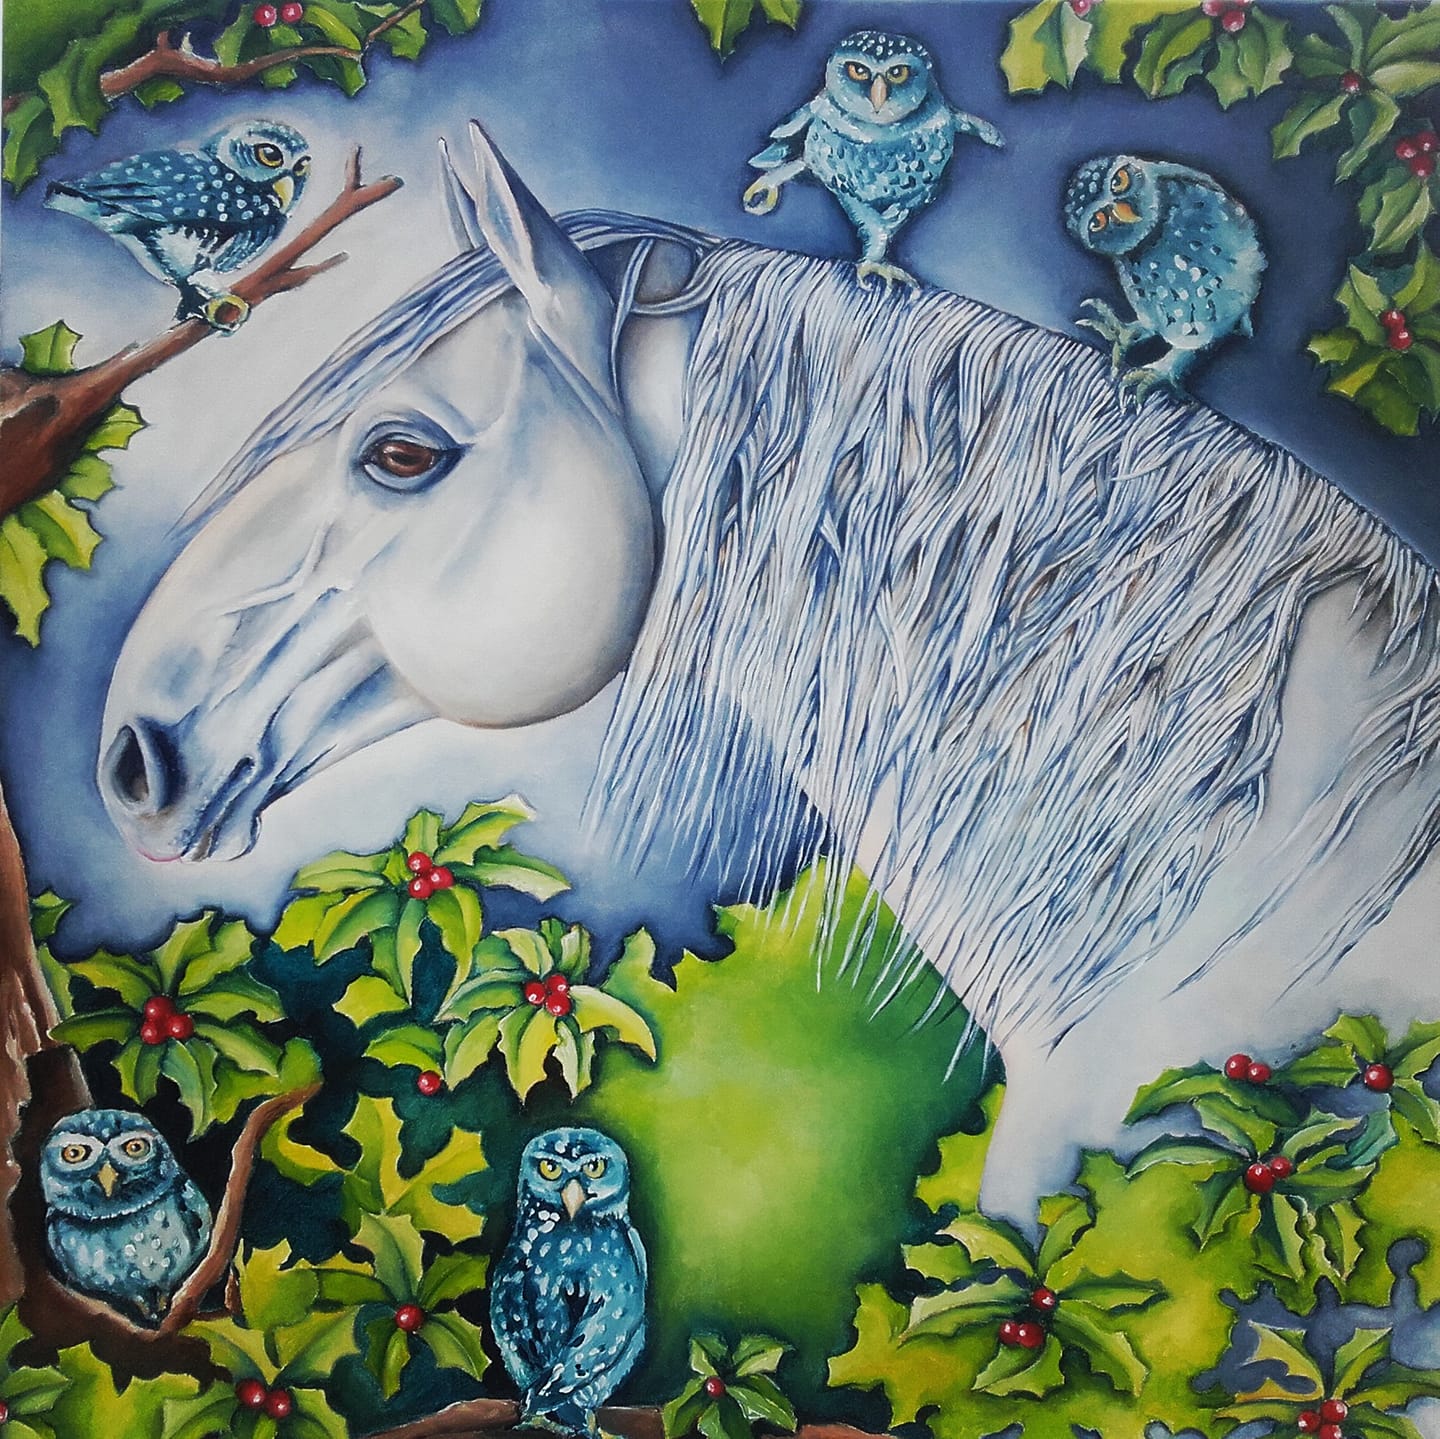 Equine Art by Baboo Paintings.
Os melhores amigos - cavalo lusitano